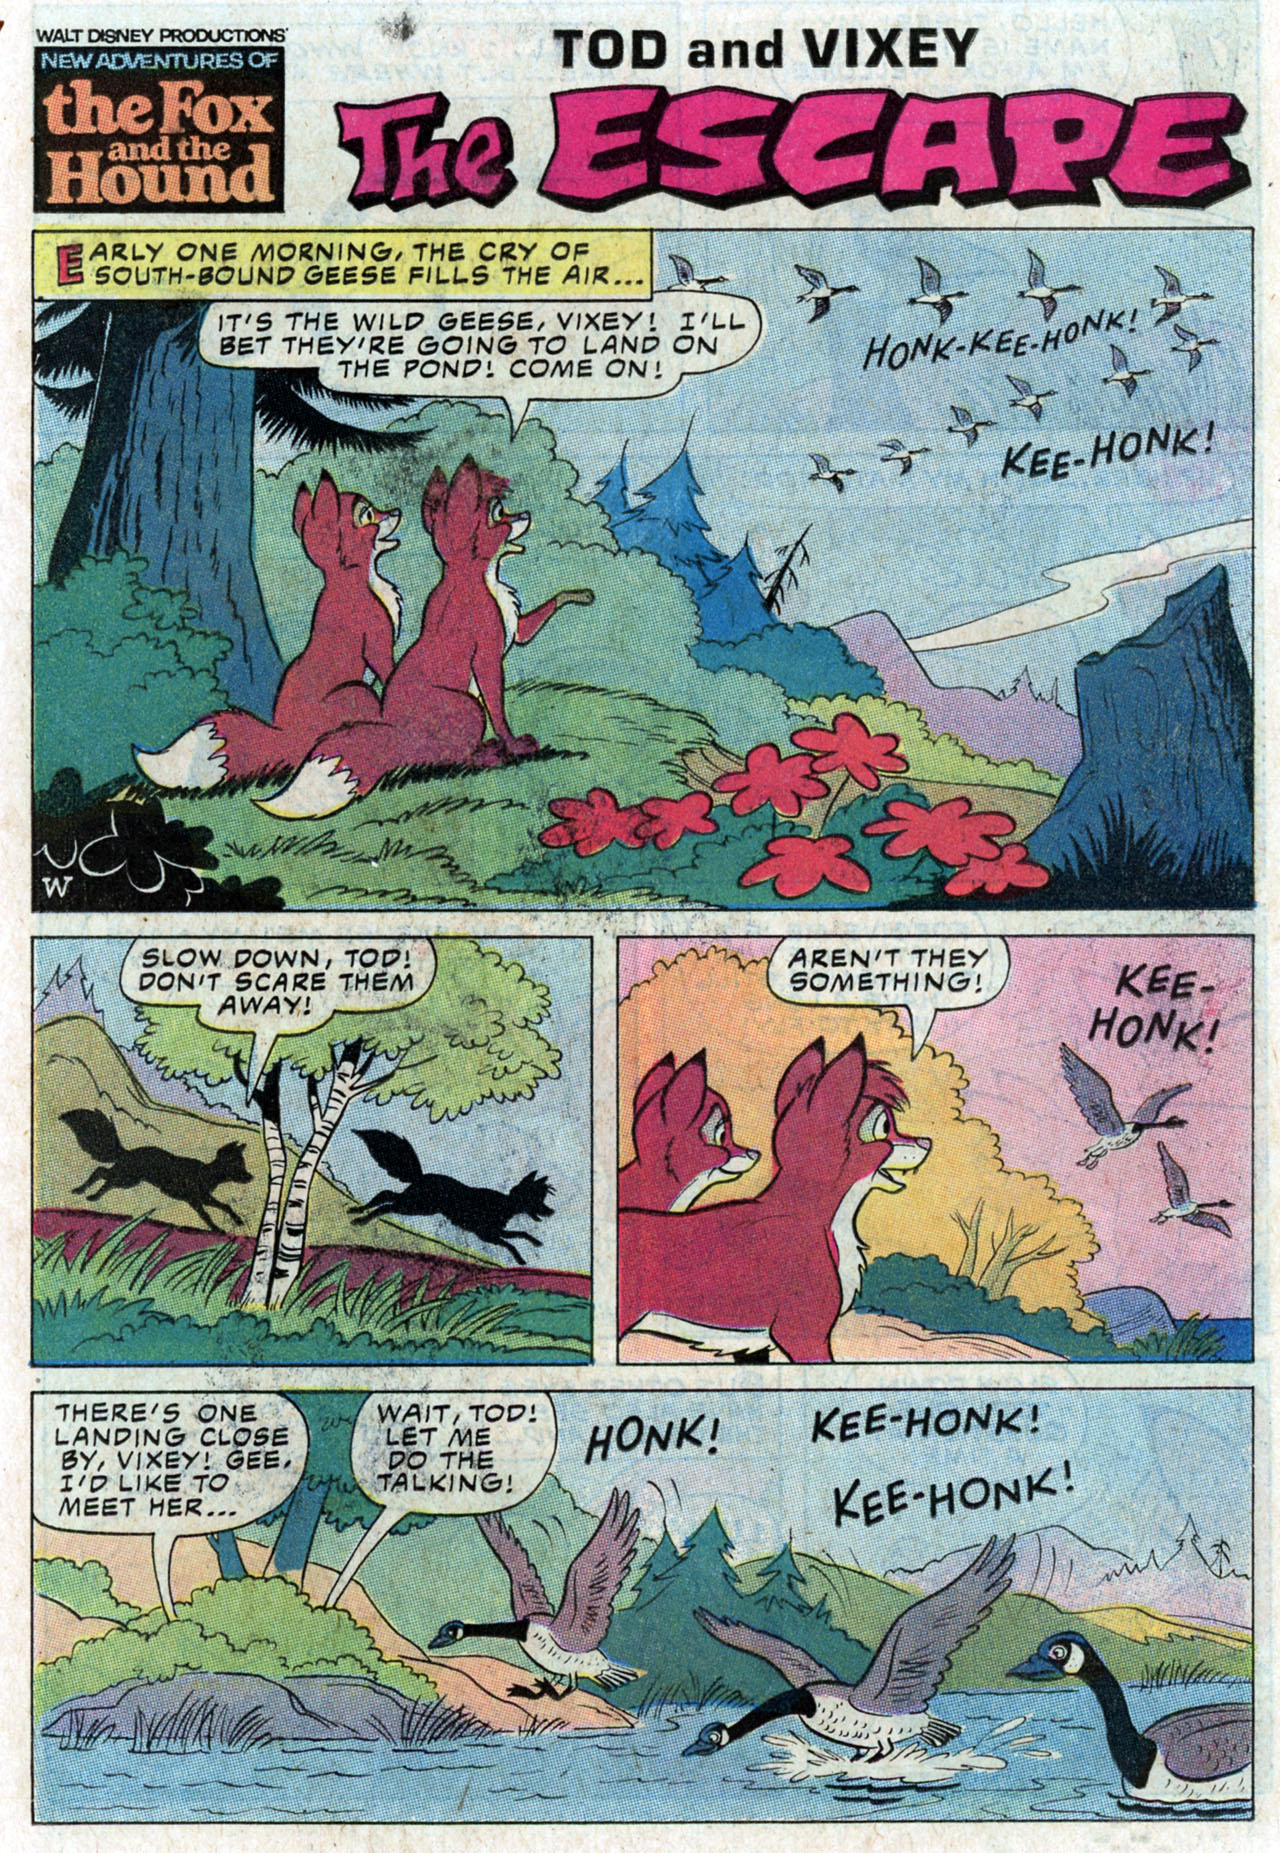 Read online Walt Disney Productions' The Fox and the Hound comic -  Issue #3 - 19